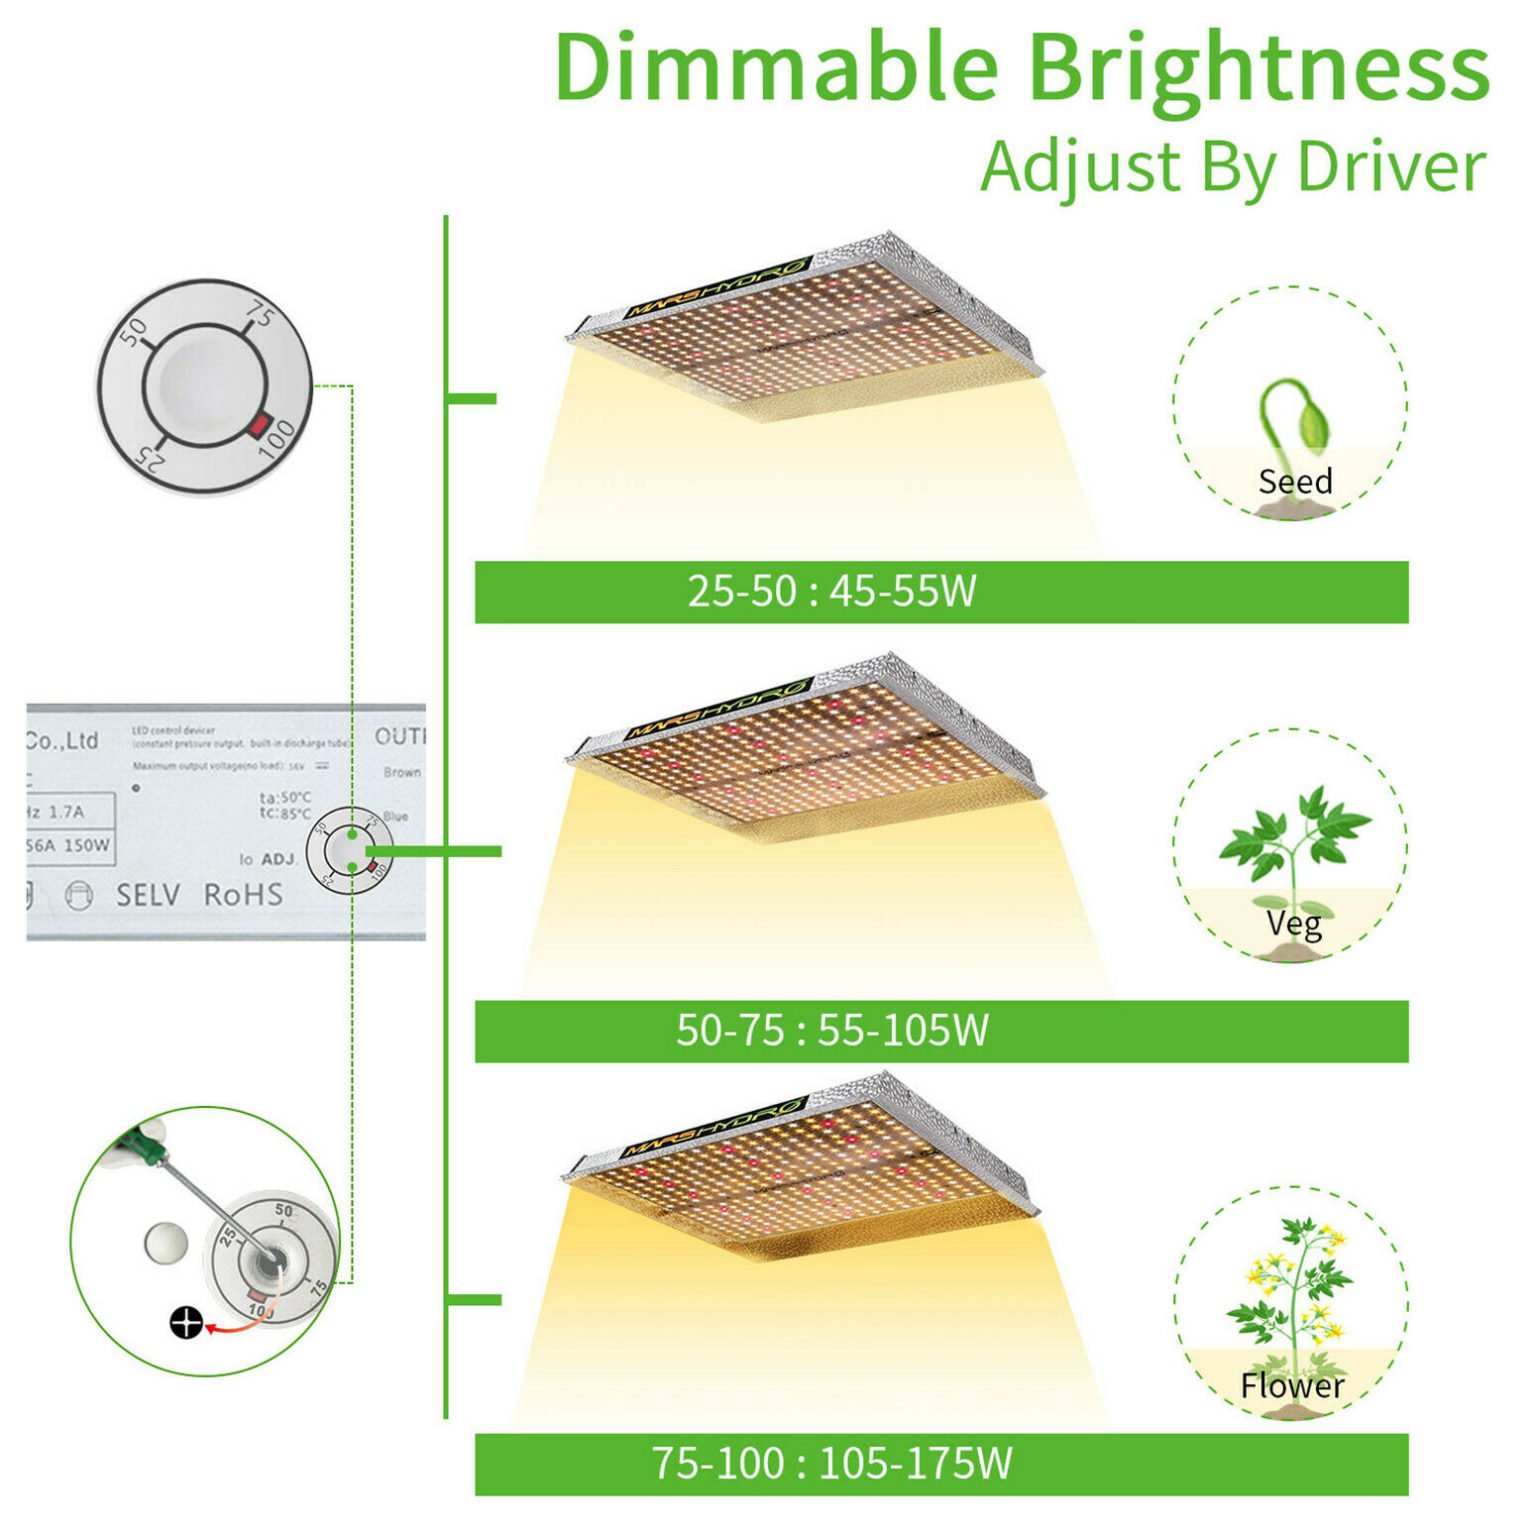 Dimmable Brightness